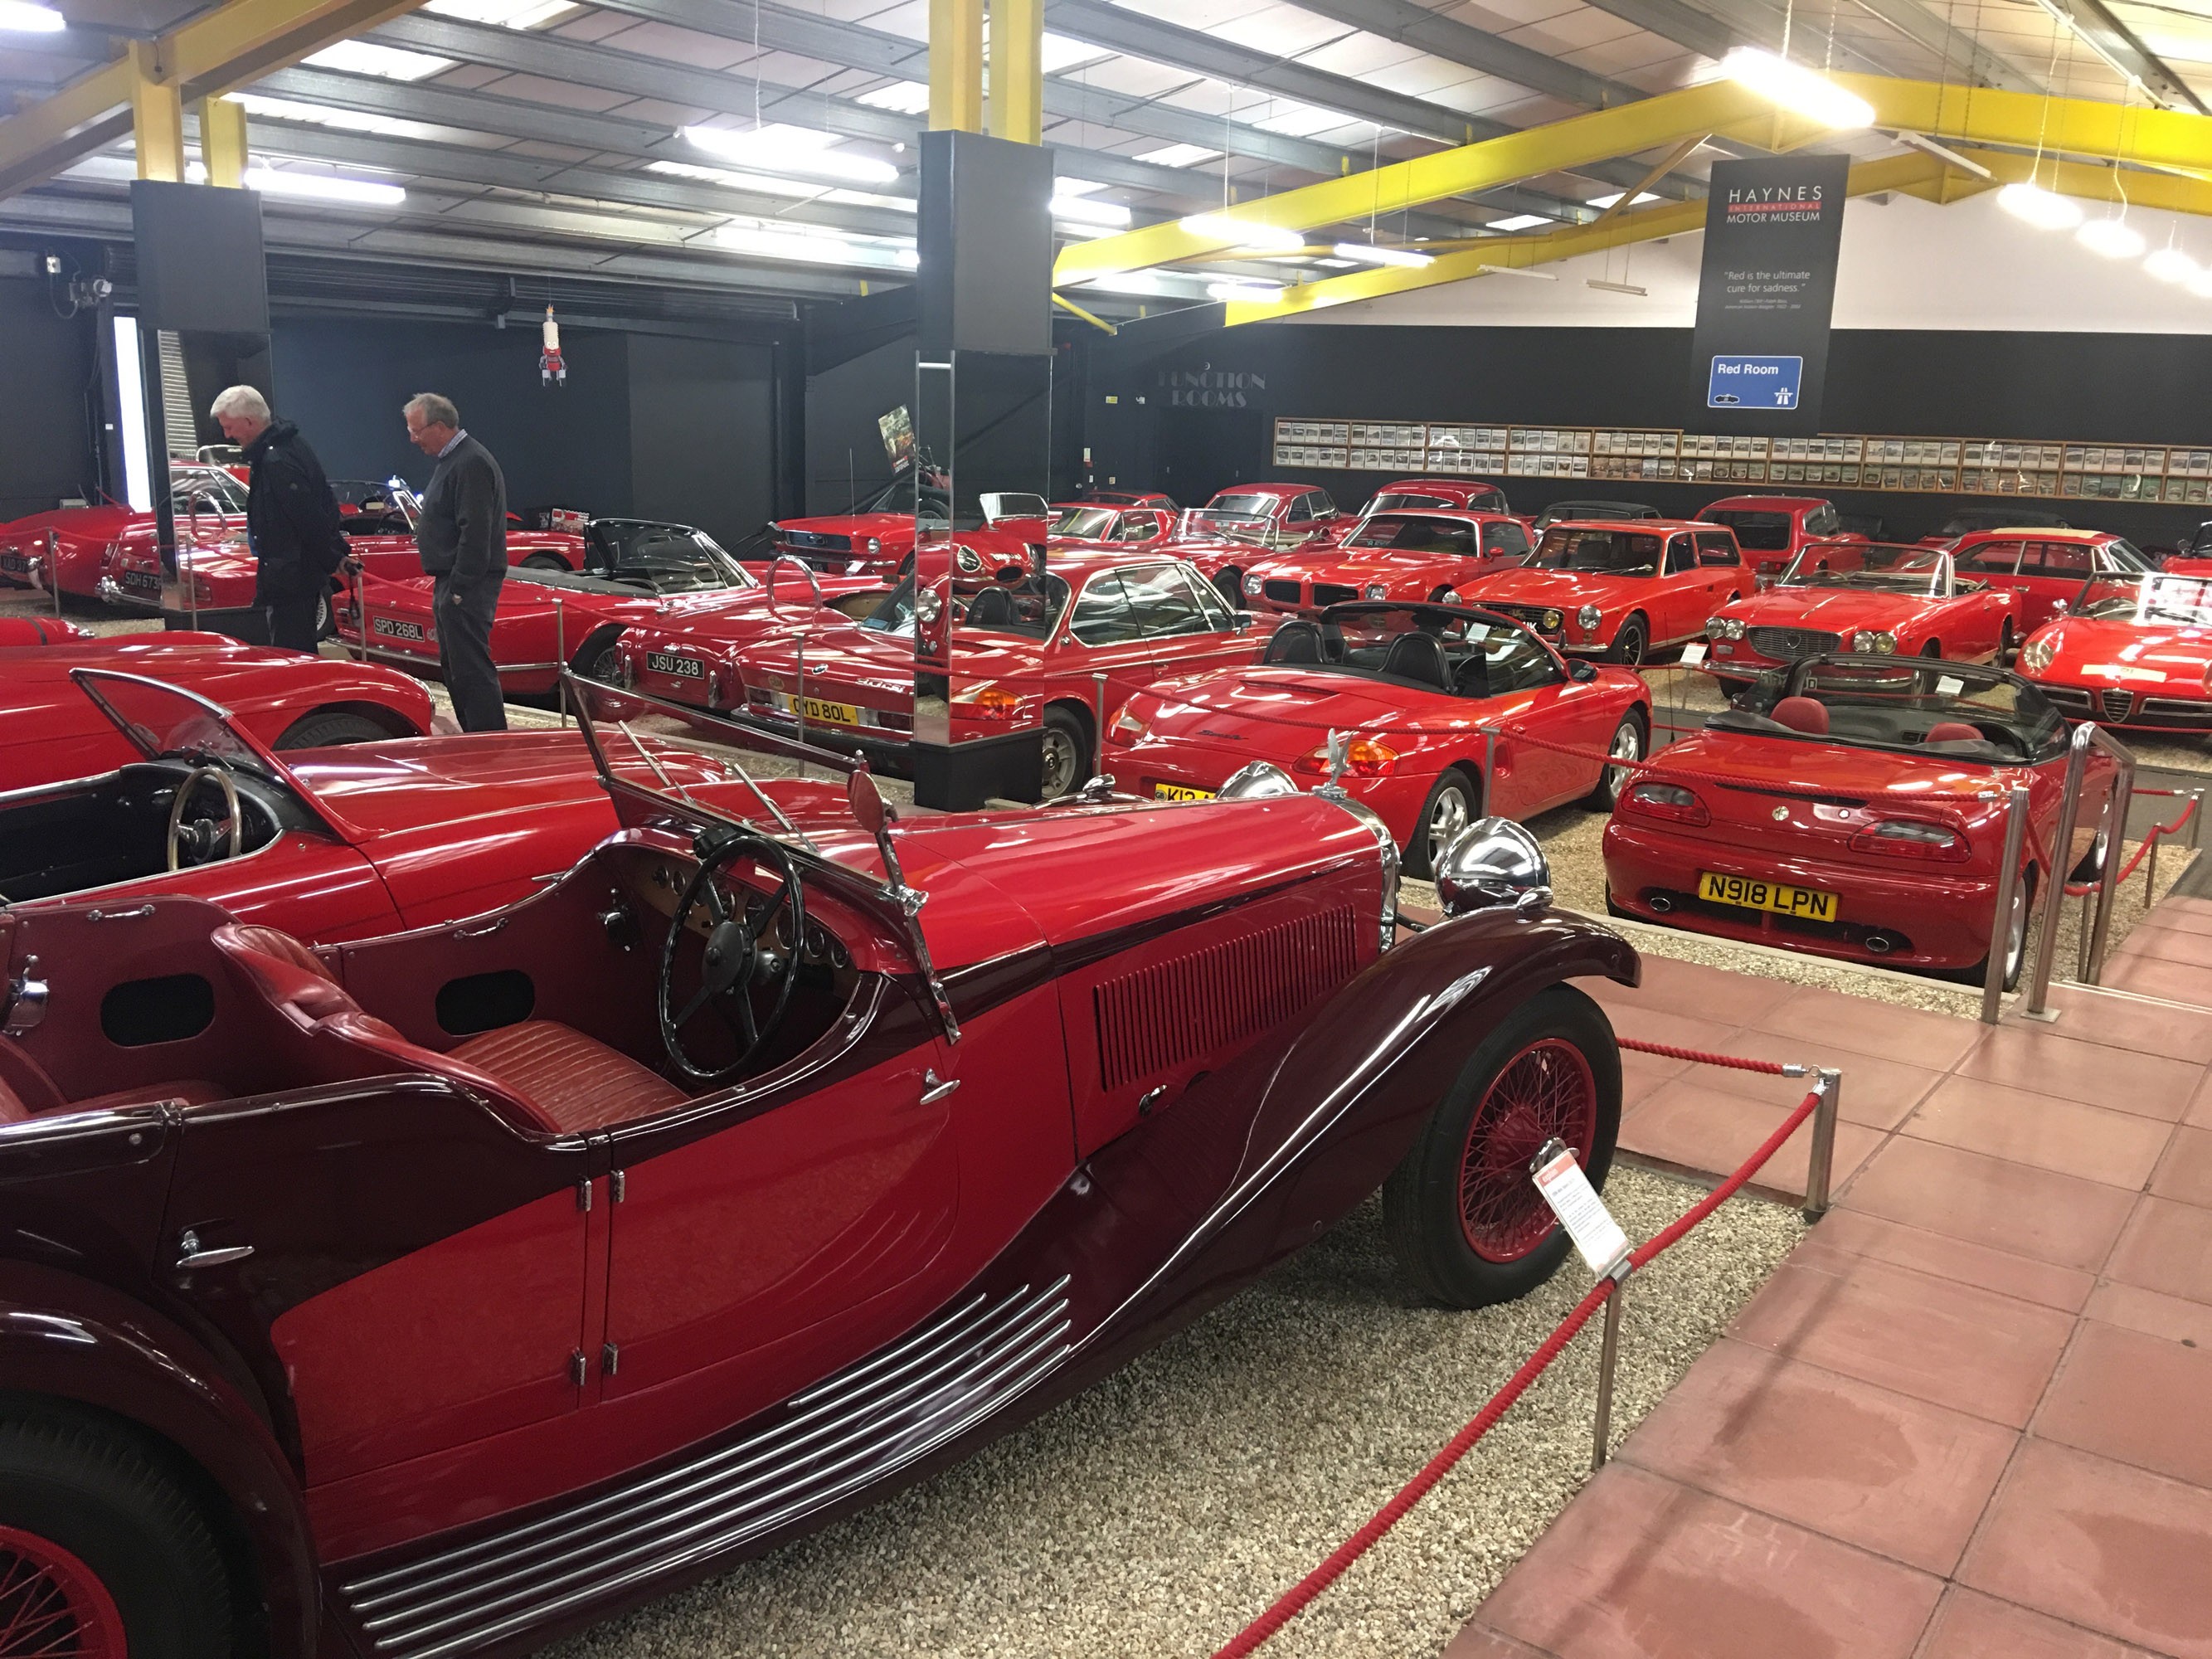 Eight Favorites From Our Accidental Trip To The Haynes Motor Museum